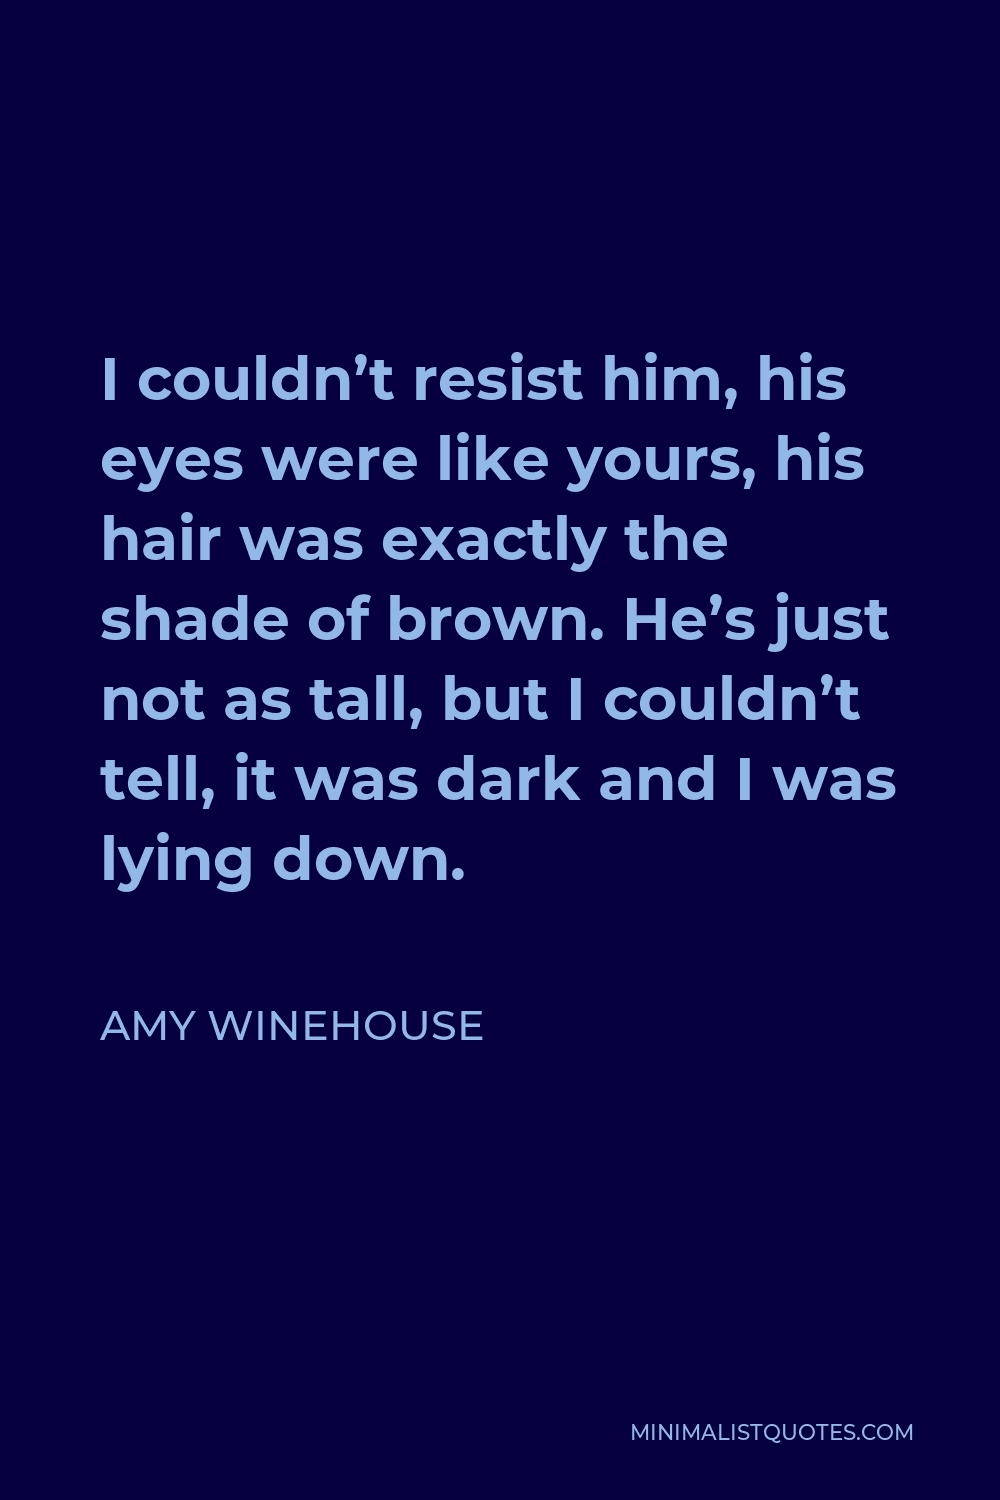 Amy Winehouse Quote - I couldn’t resist him, his eyes were like yours, his hair was exactly the shade of brown. He’s just not as tall, but I couldn’t tell, it was dark and I was lying down.